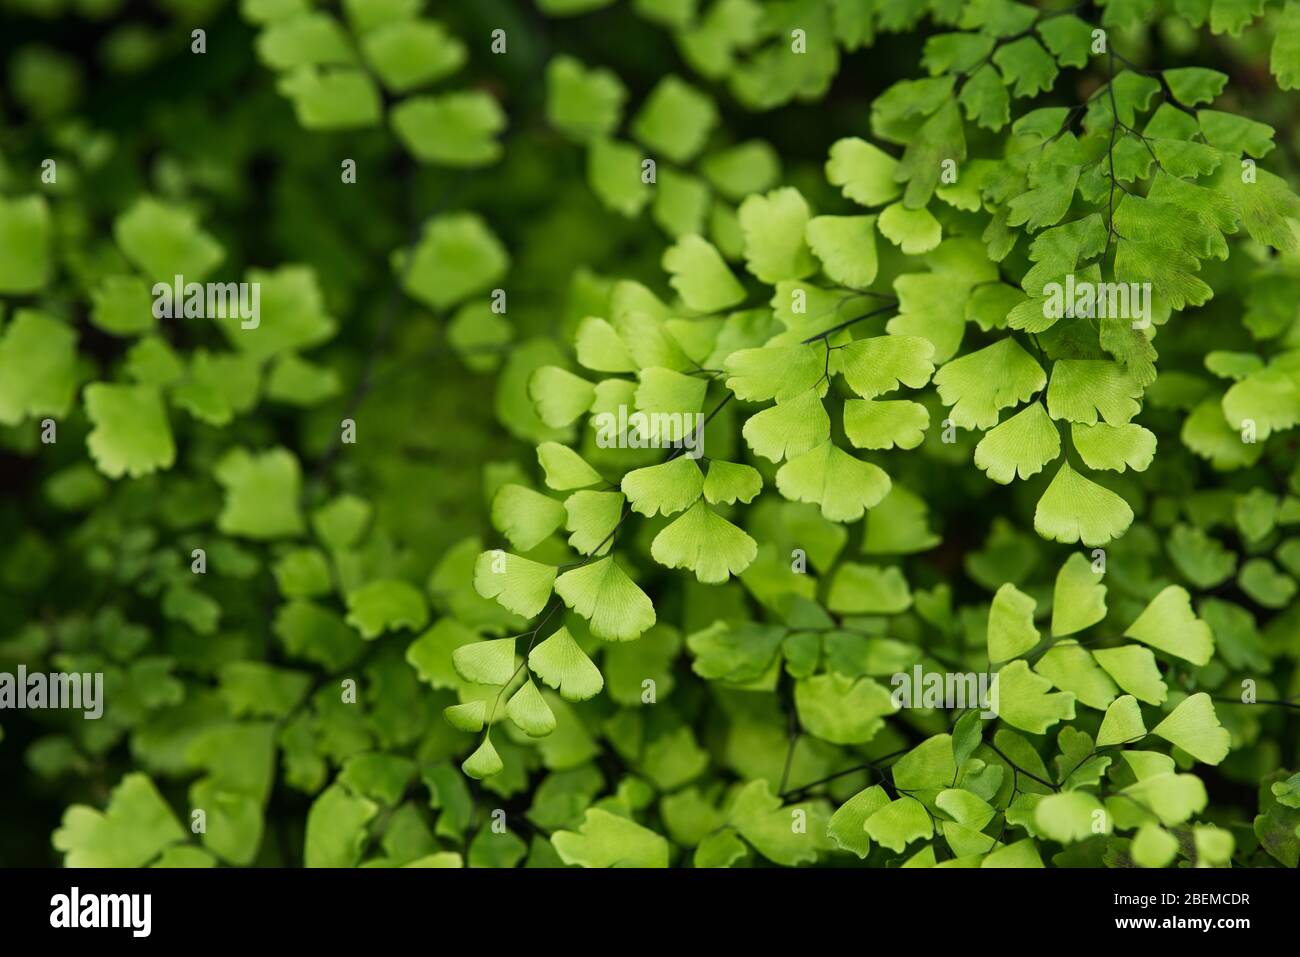 Creeping jenny (Lysimachia nummularia) is a species of flowering plant in the family Primulaceae. Stock Photo